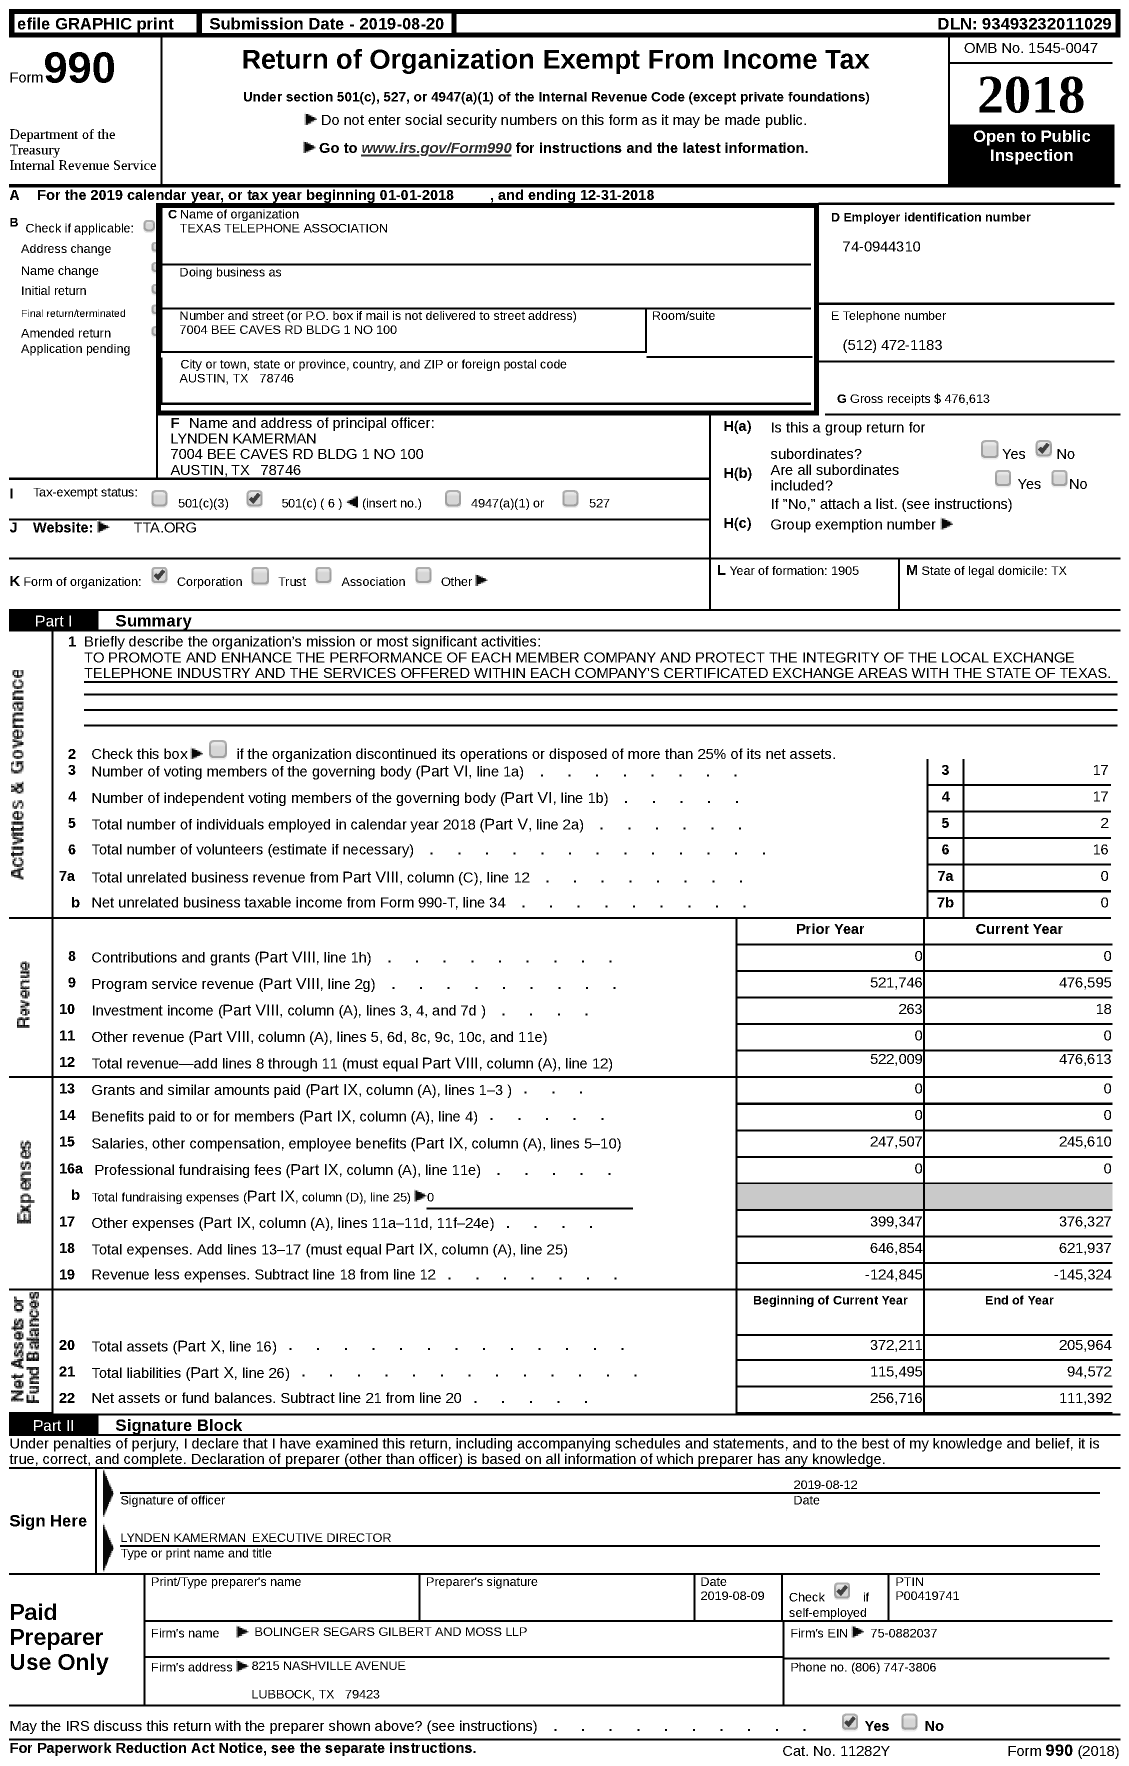 Image of first page of 2018 Form 990 for Texas Telephone Association